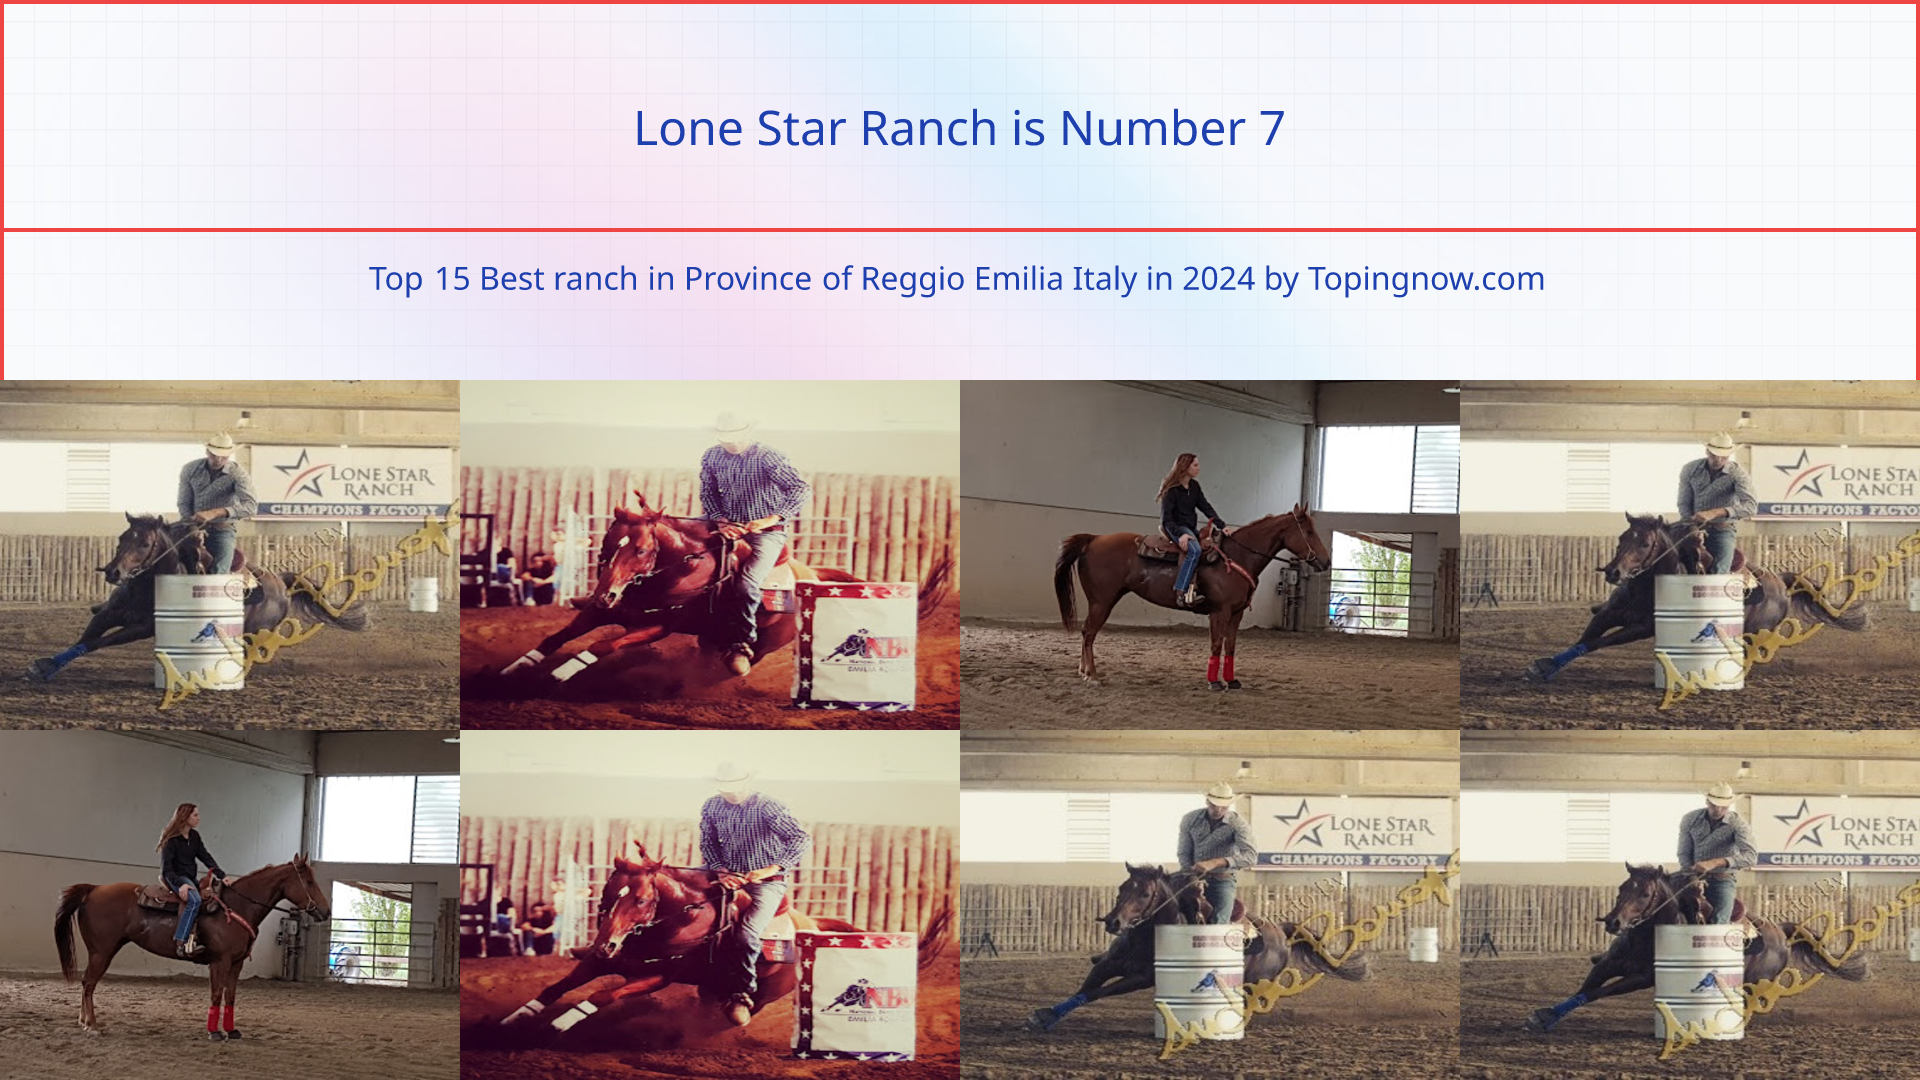 Lone Star Ranch: Top 15 Best ranch in Province of Reggio Emilia Italy in 2024